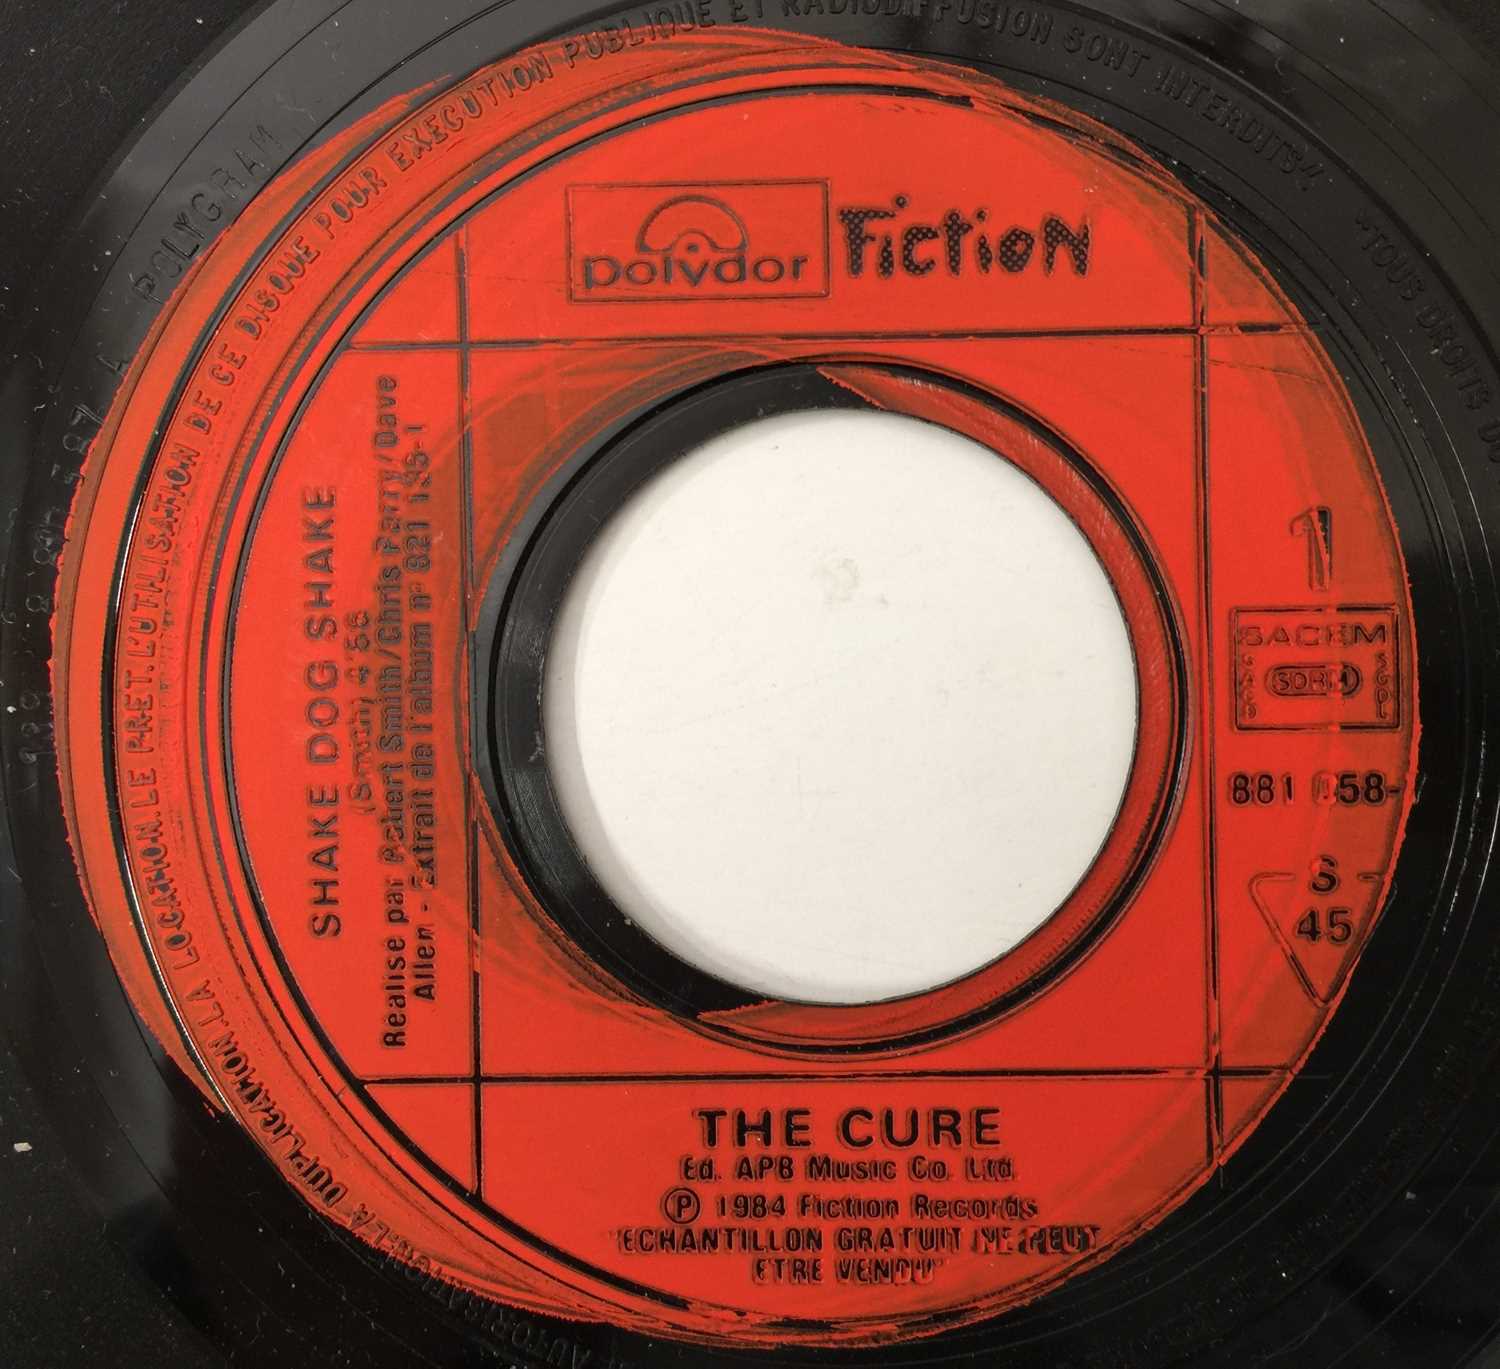 Lot 92 - THE CURE - SHAKE DOG SHAKE 7" (ORIGINAL FRENCH RELEASE - POLYDOR 881 058-7)